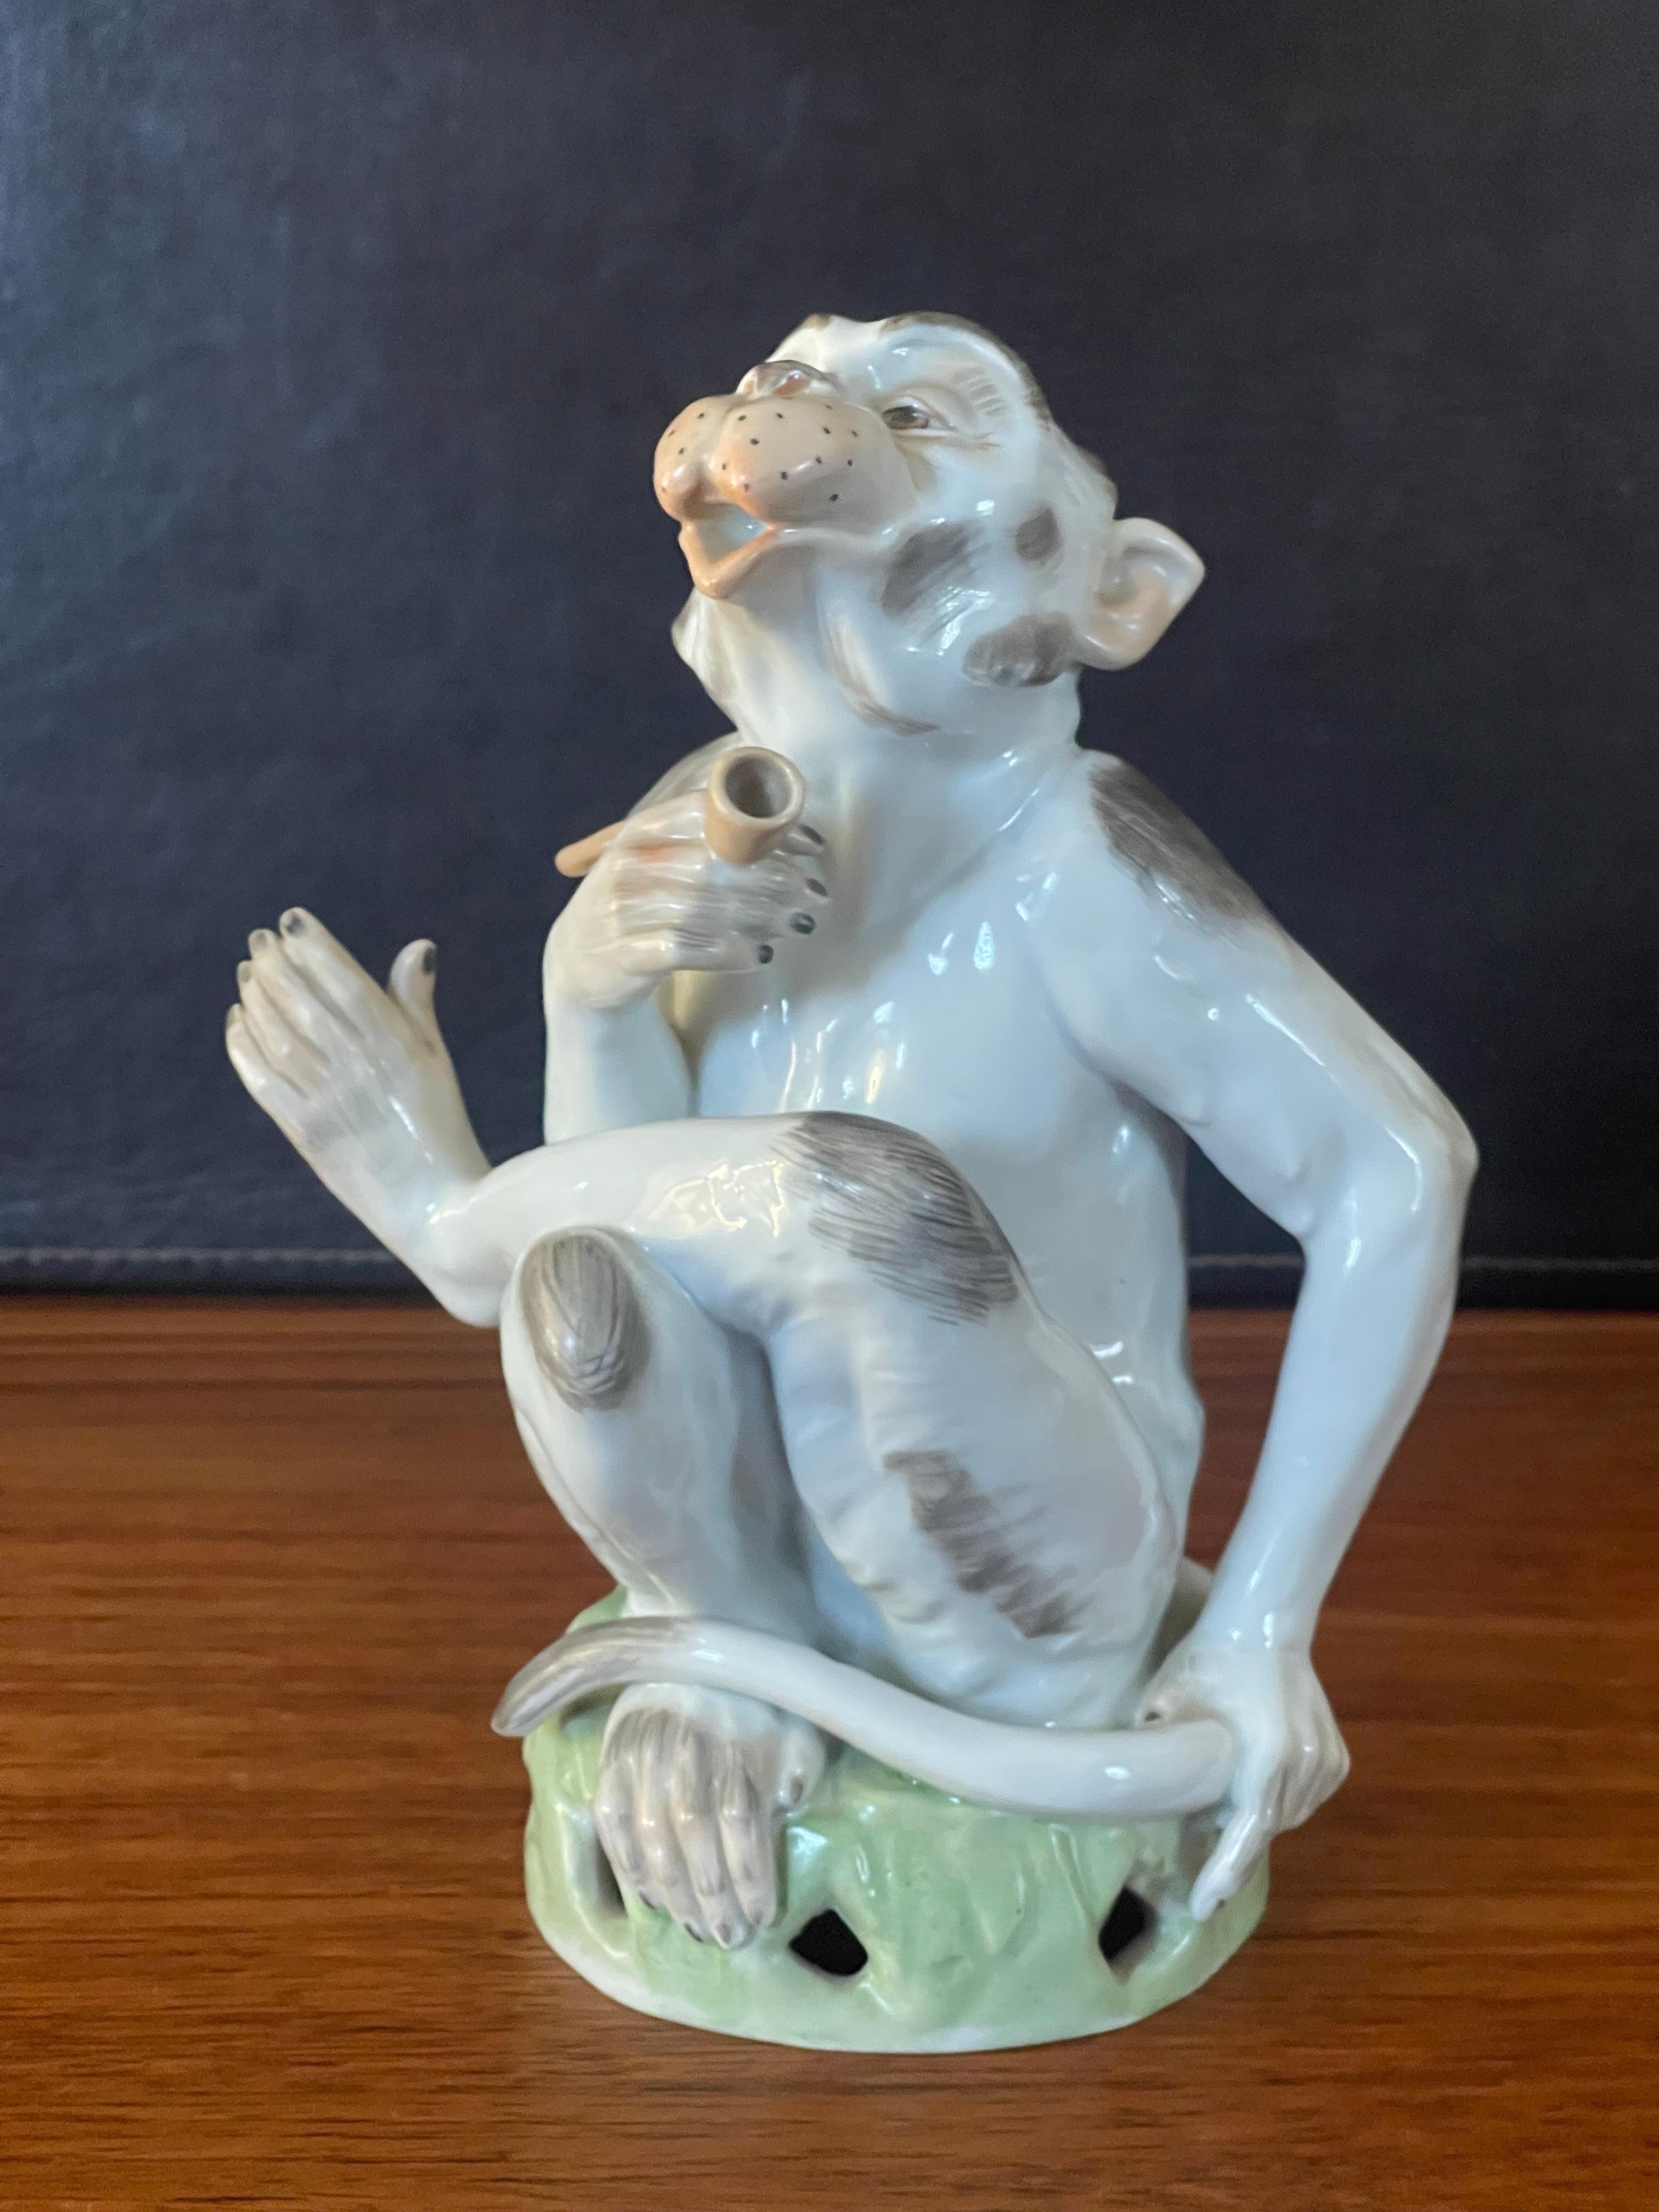 Porcelain Smoking Monkey with Pipe by Carl Thieme for Dresden 1